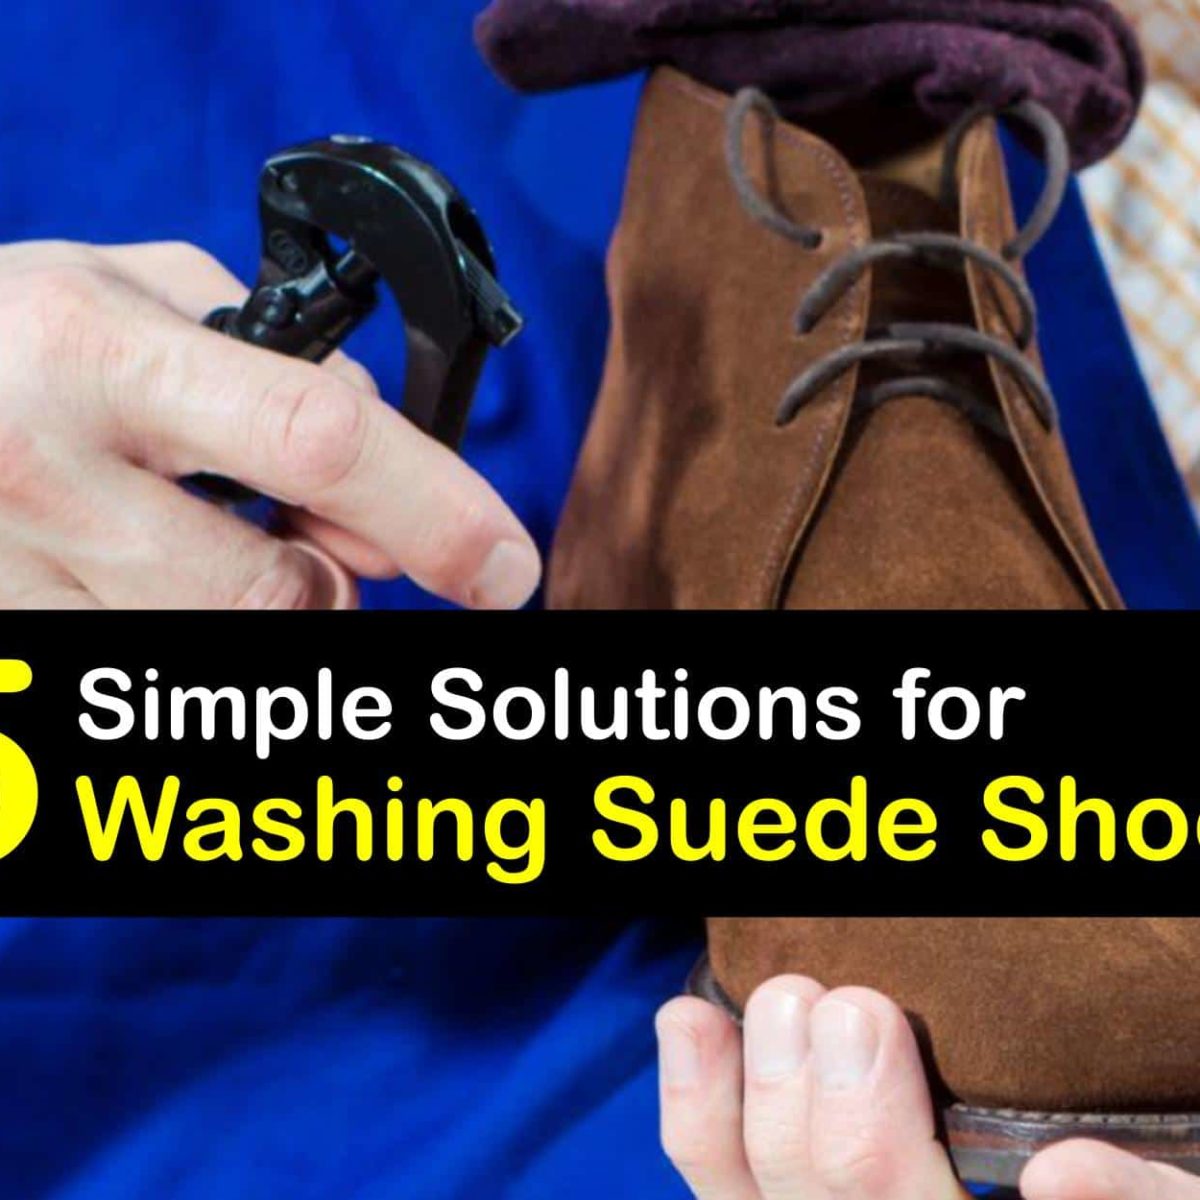 Washing Suede Shoes - Terrific Tips for Cleaning Suede Shoes